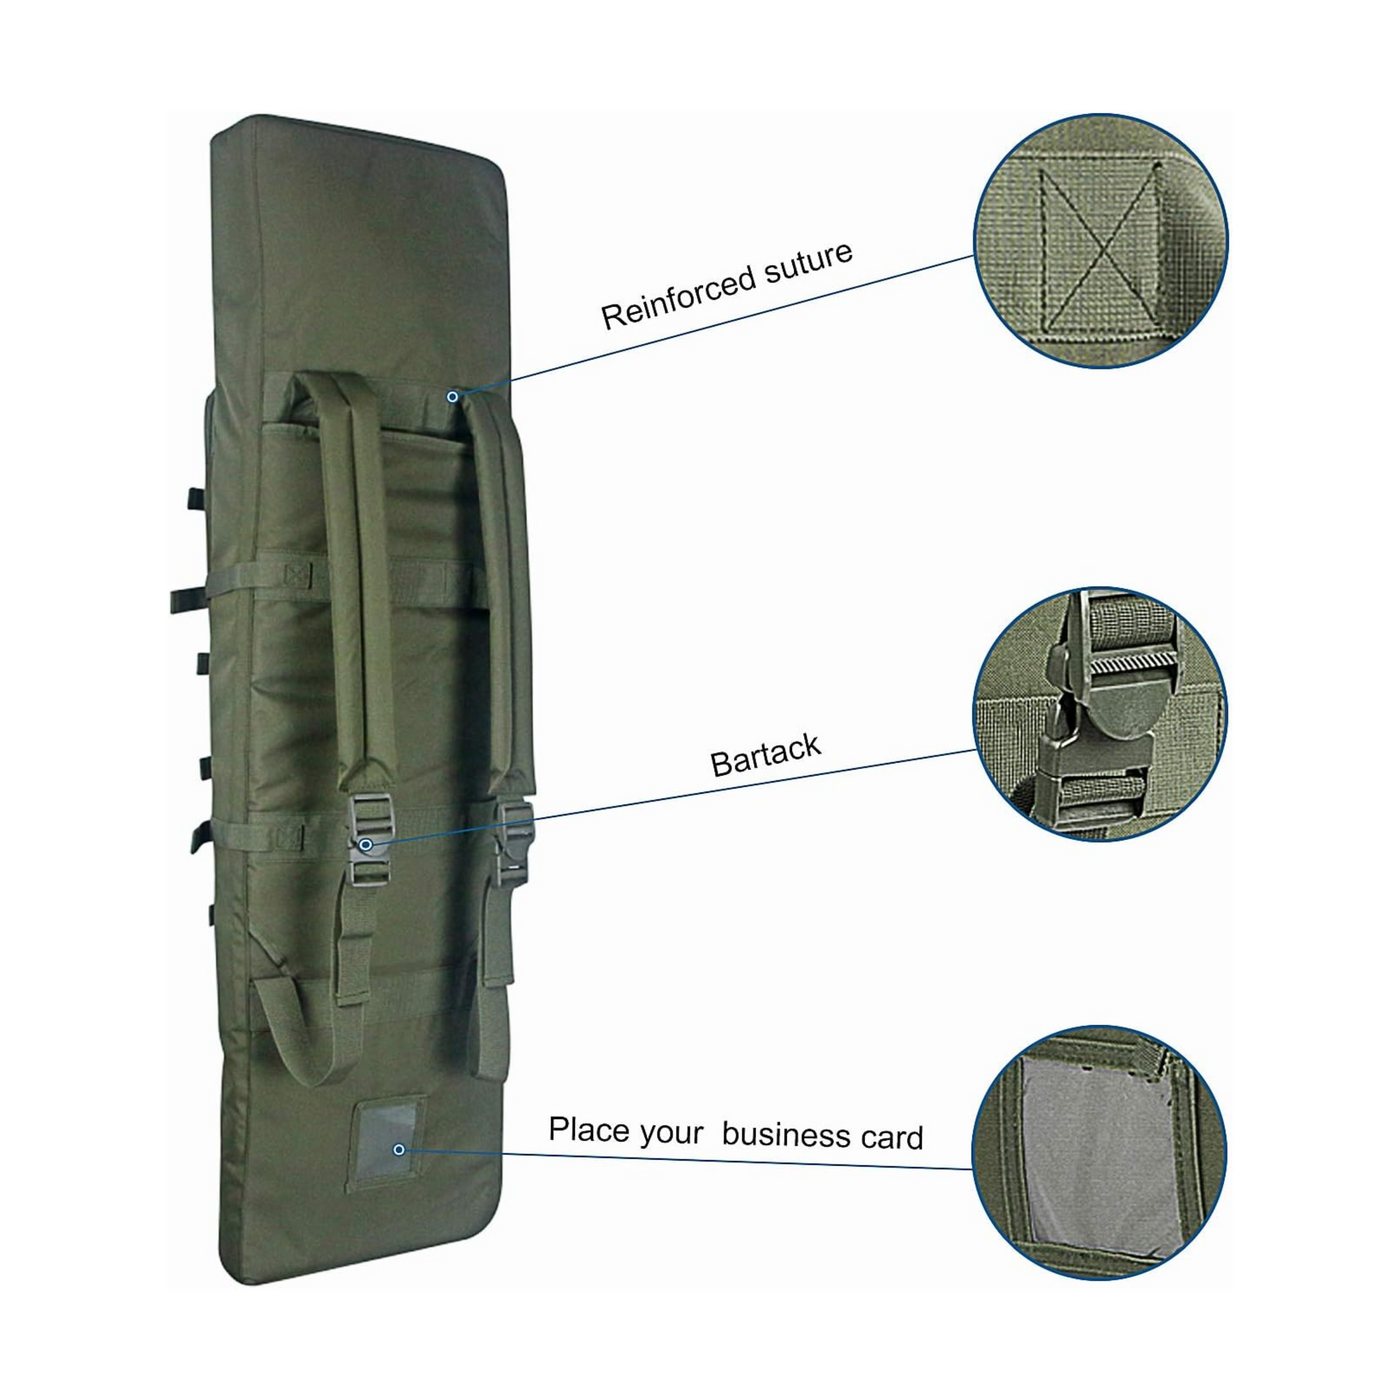 Multi-functional survival tool with built-in flashlight and compass